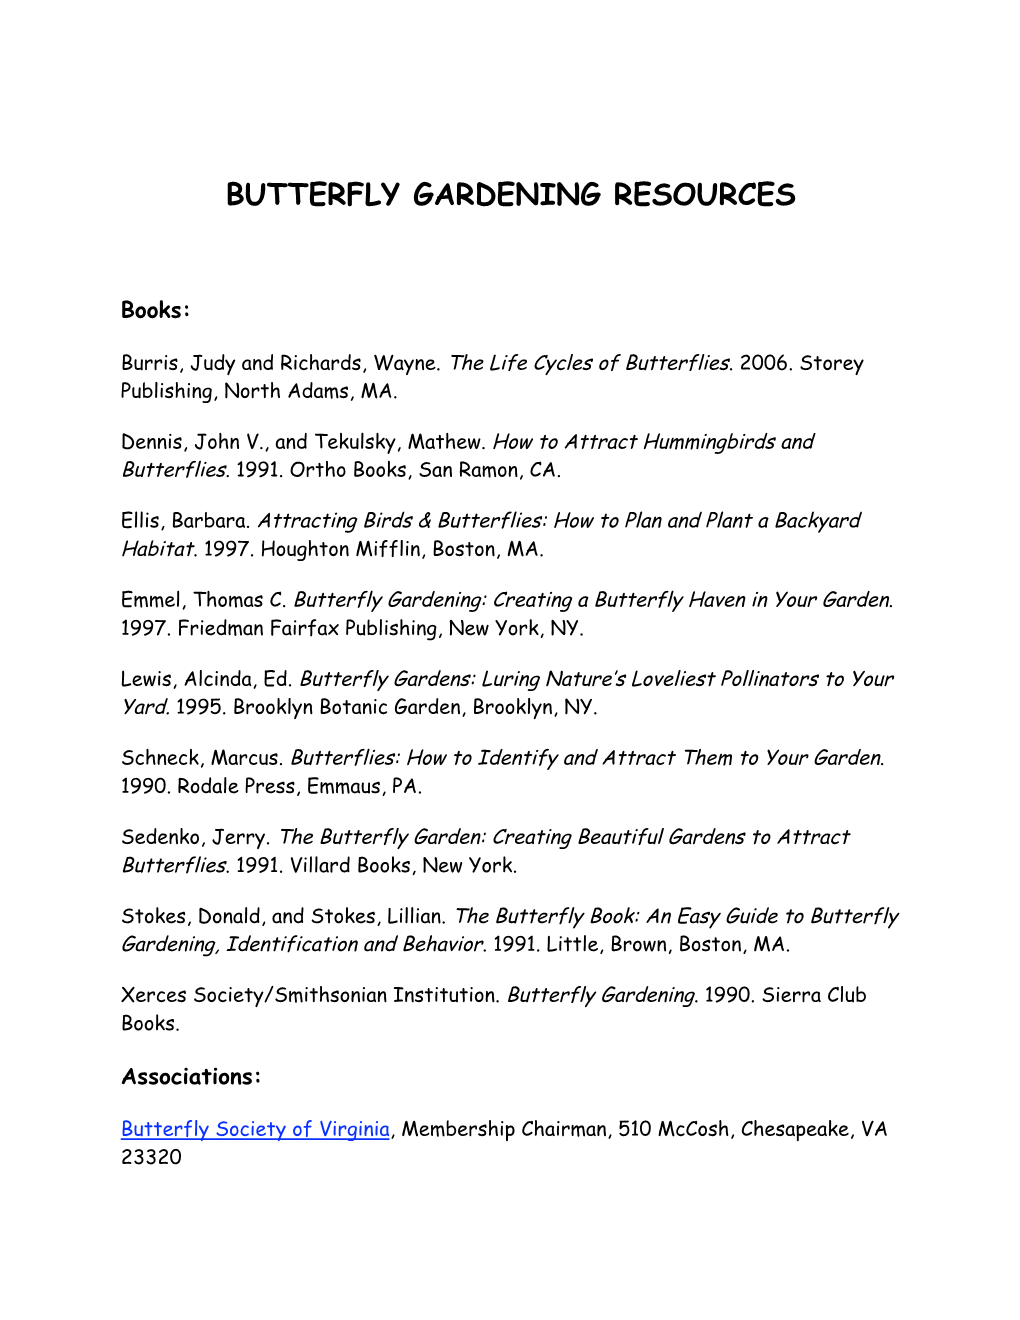 Butterfly Gardening Resources